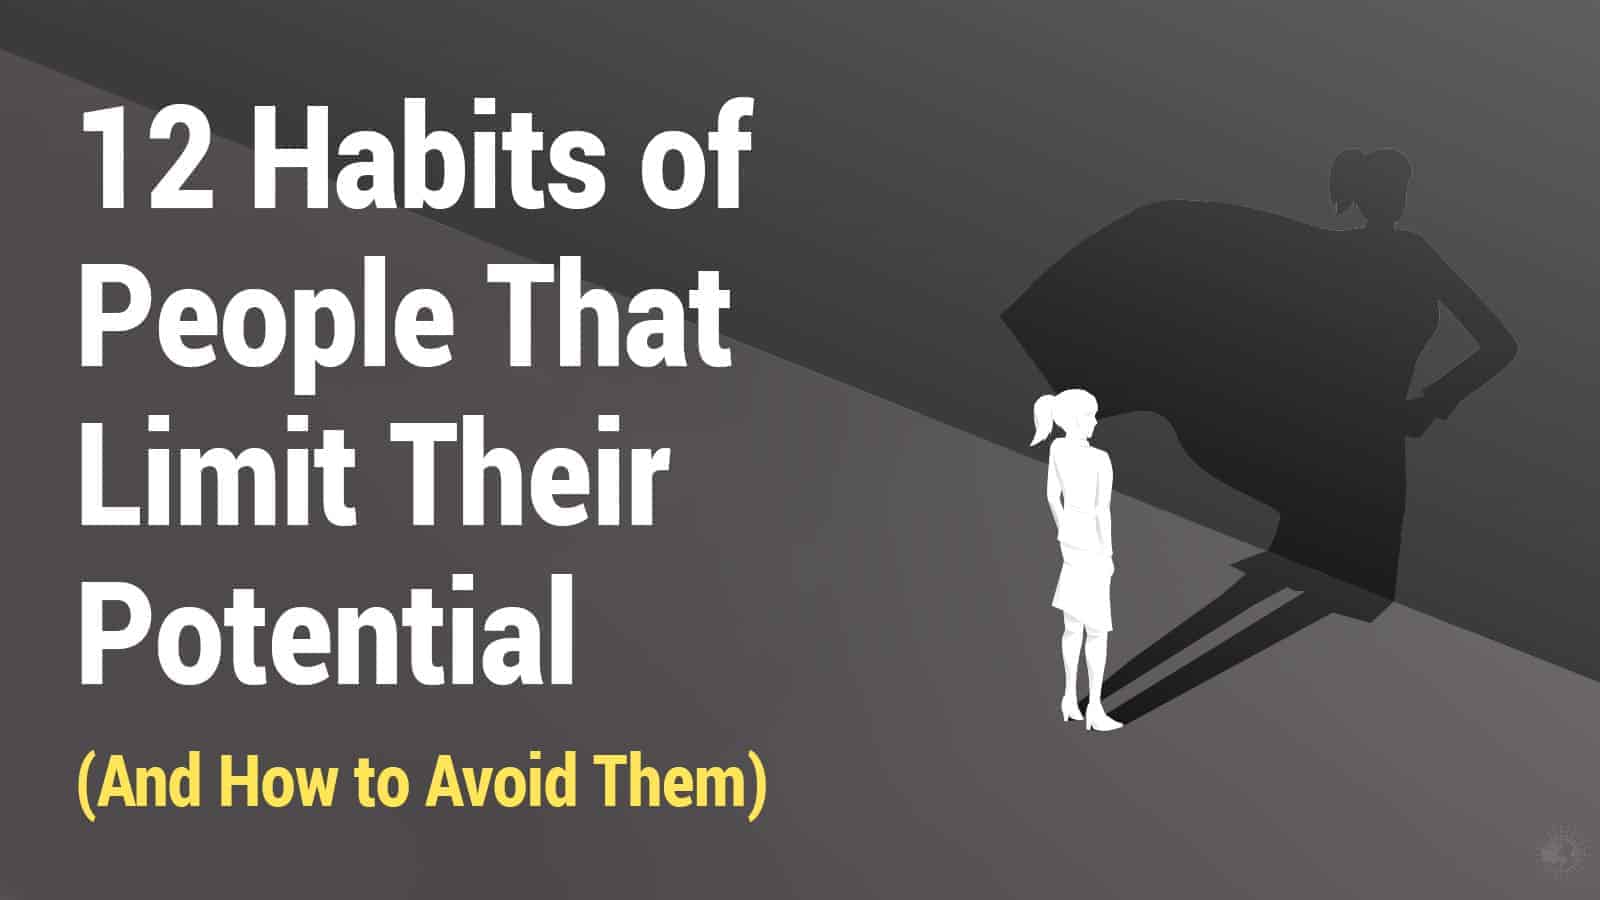 12 Habits of People That Limit Their Potential (And How to Avoid Them)